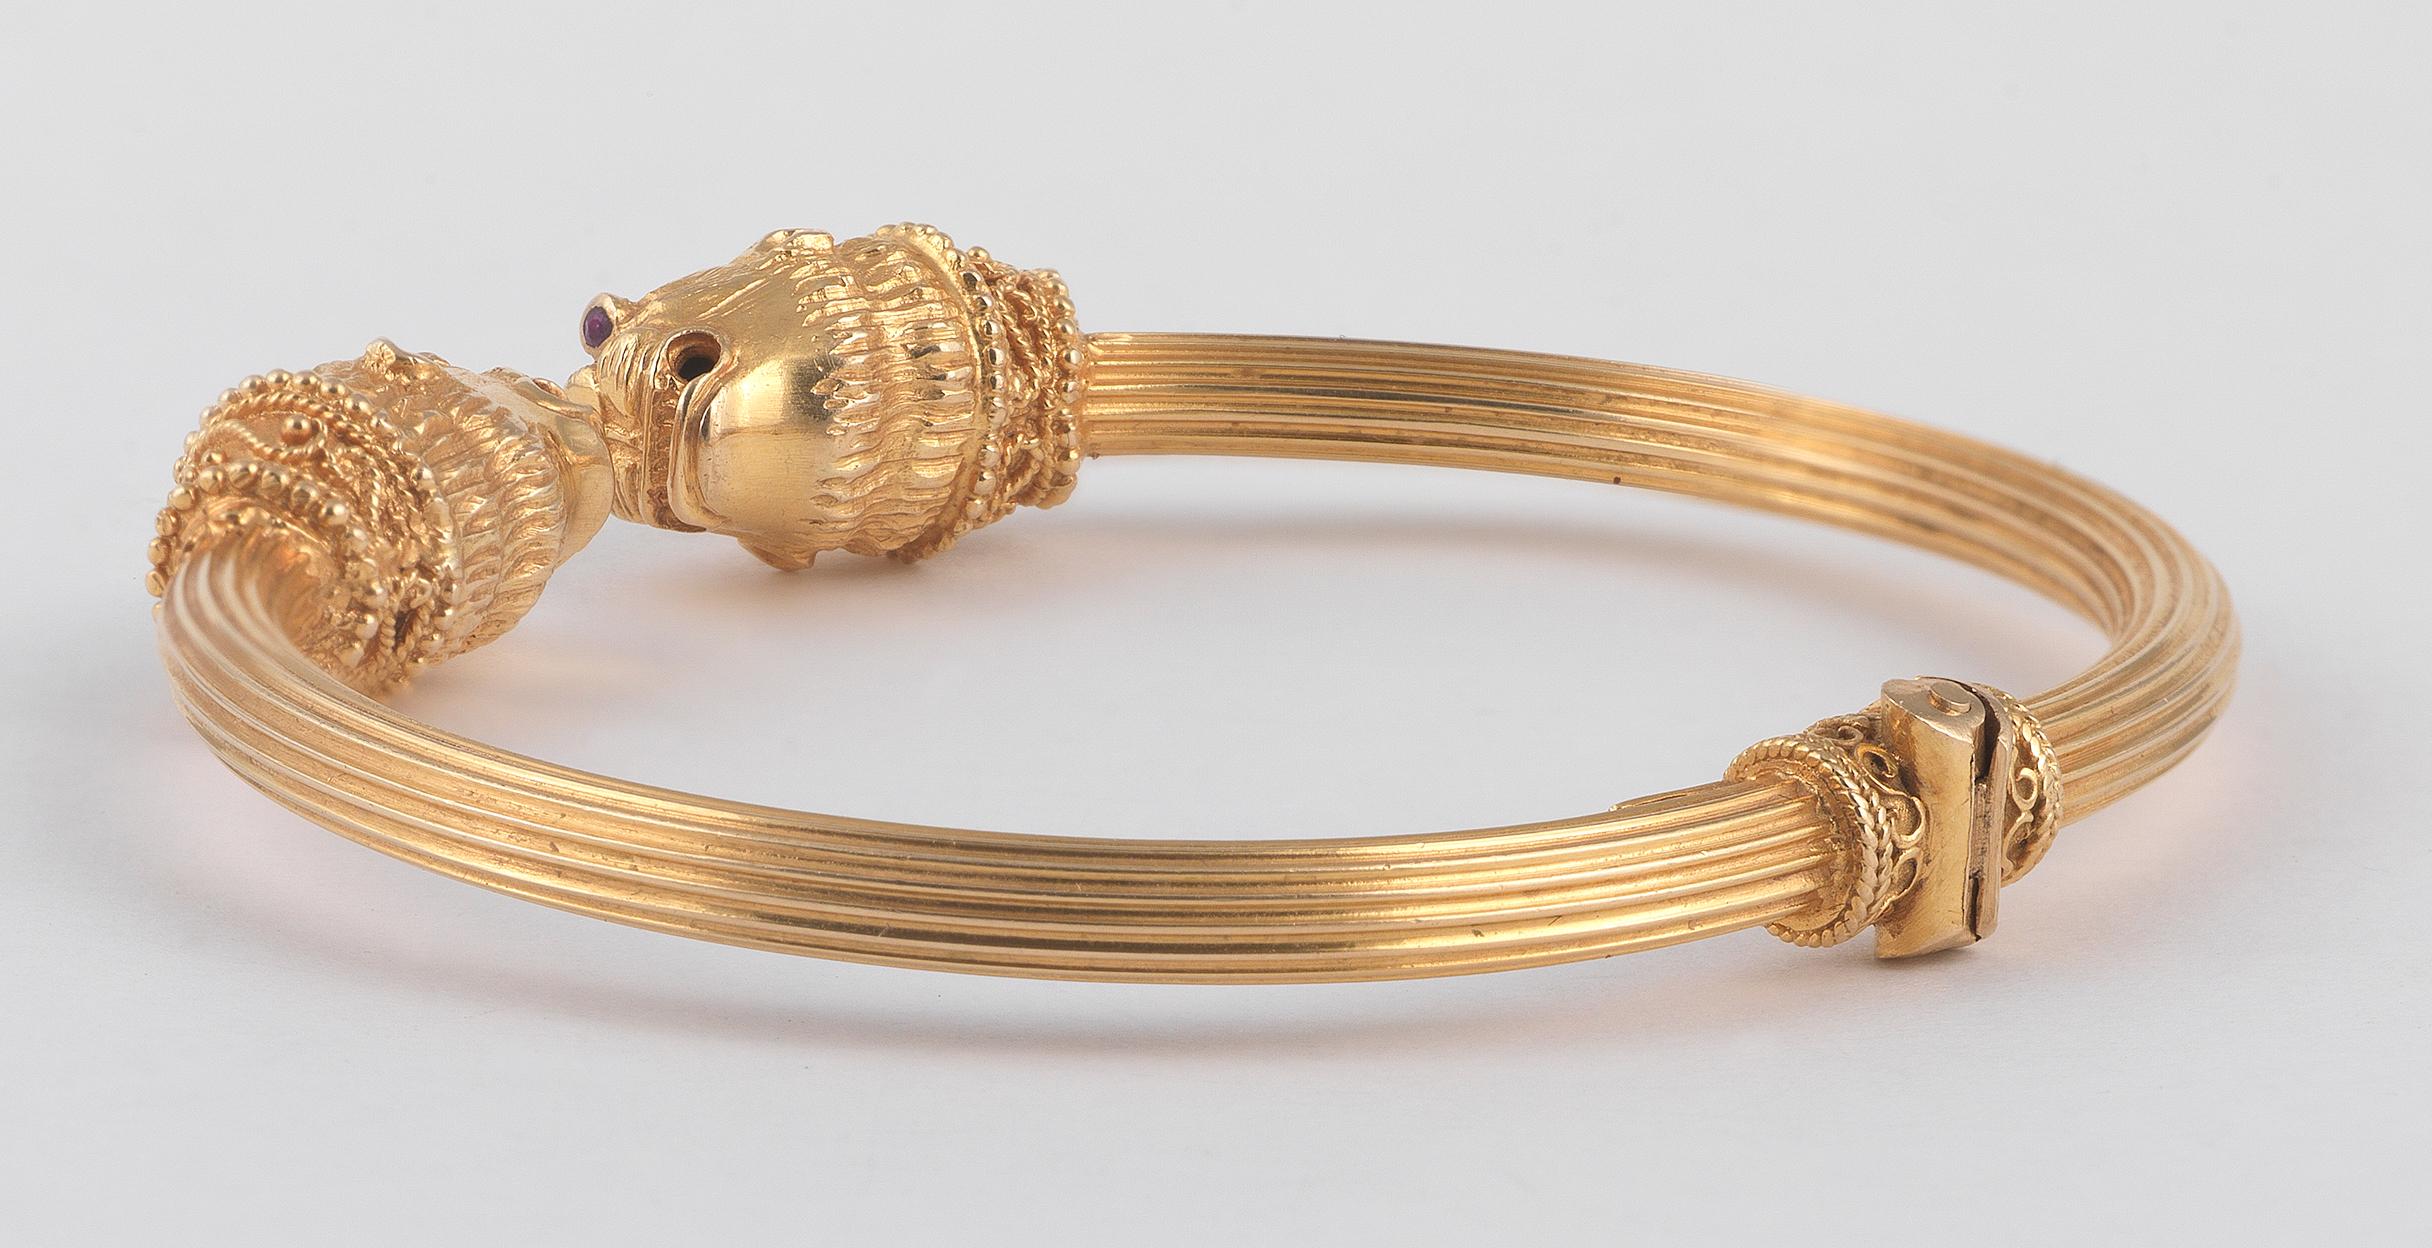 An eighteen karat gold lion head bangle bracelet, LaLaounis
with makers mark for LaLaounis; weighing approximately: 23.6 grams; diameter: 56mm